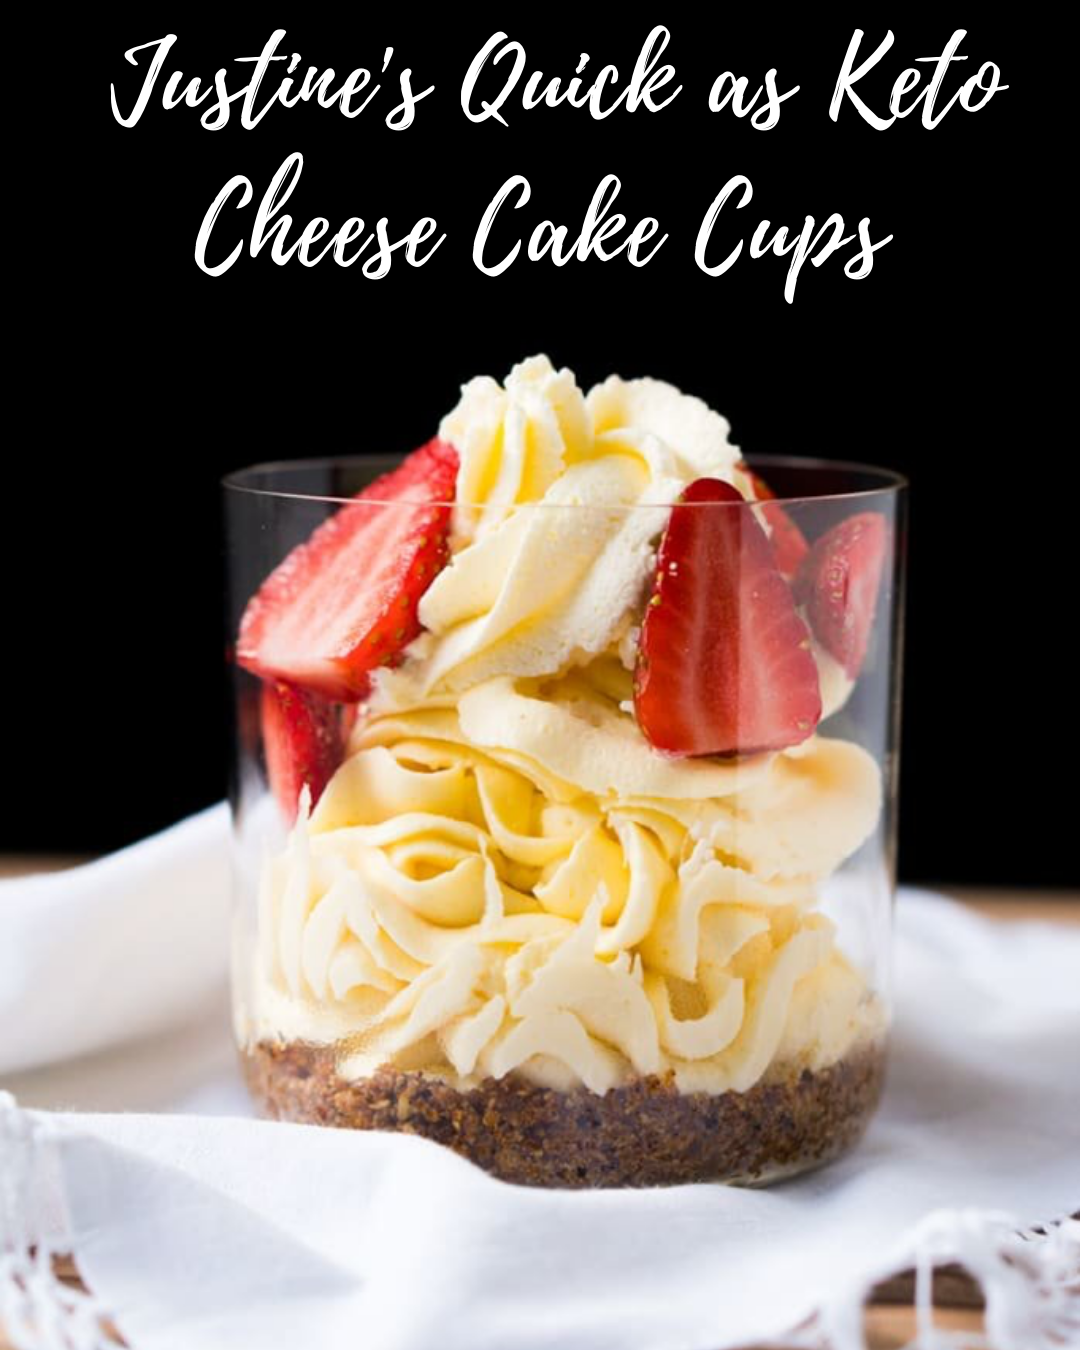 Justine's Quick as Keto Cheese Cake Cups